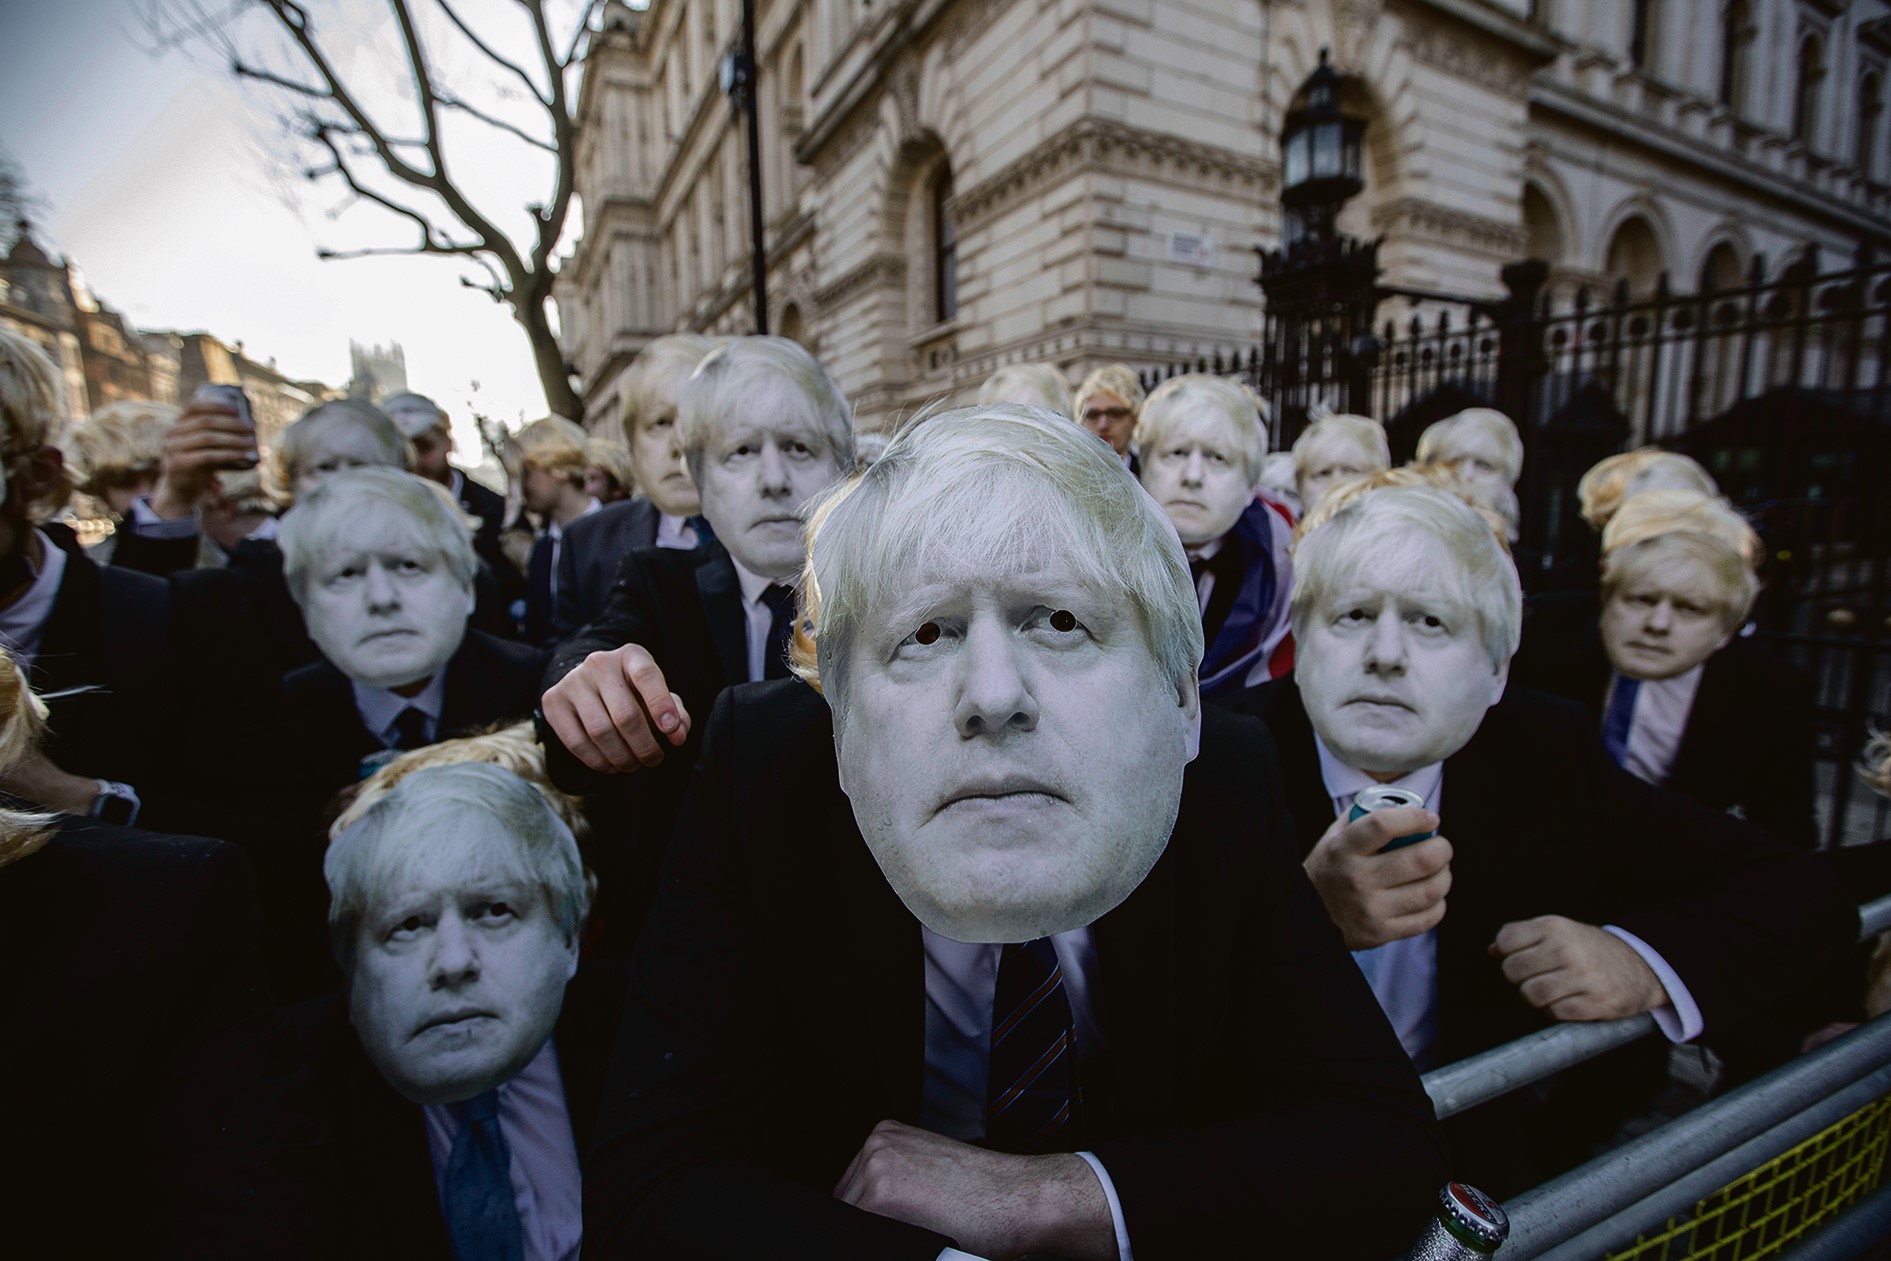 Protesters wearing floppy blond wigs and Boris Johnson masks